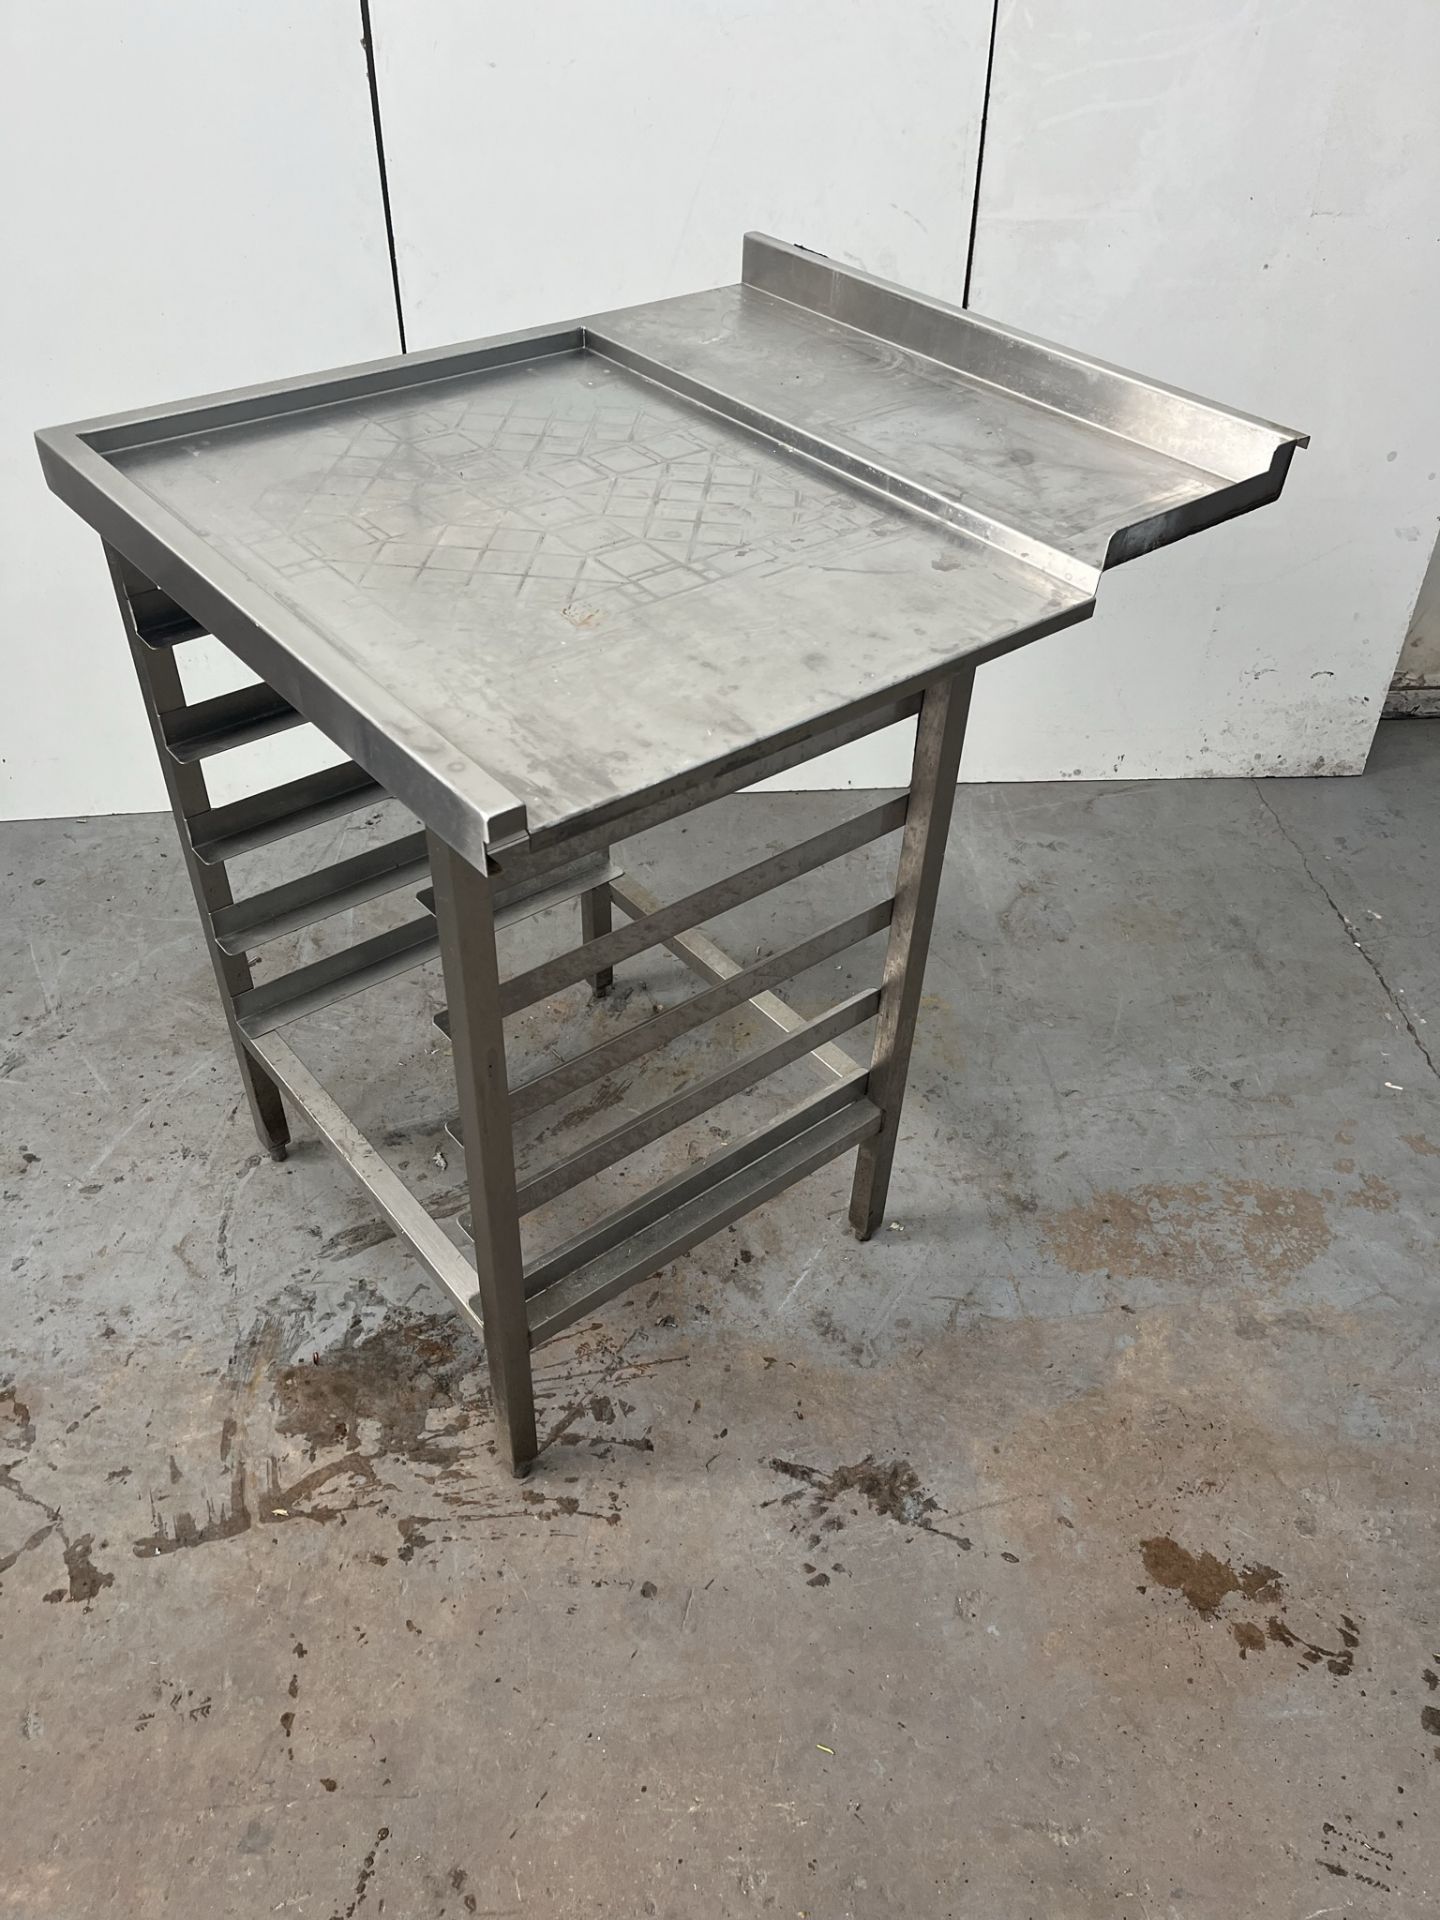 700mm Stainless Steel Catering Preperation Table - Image 5 of 5